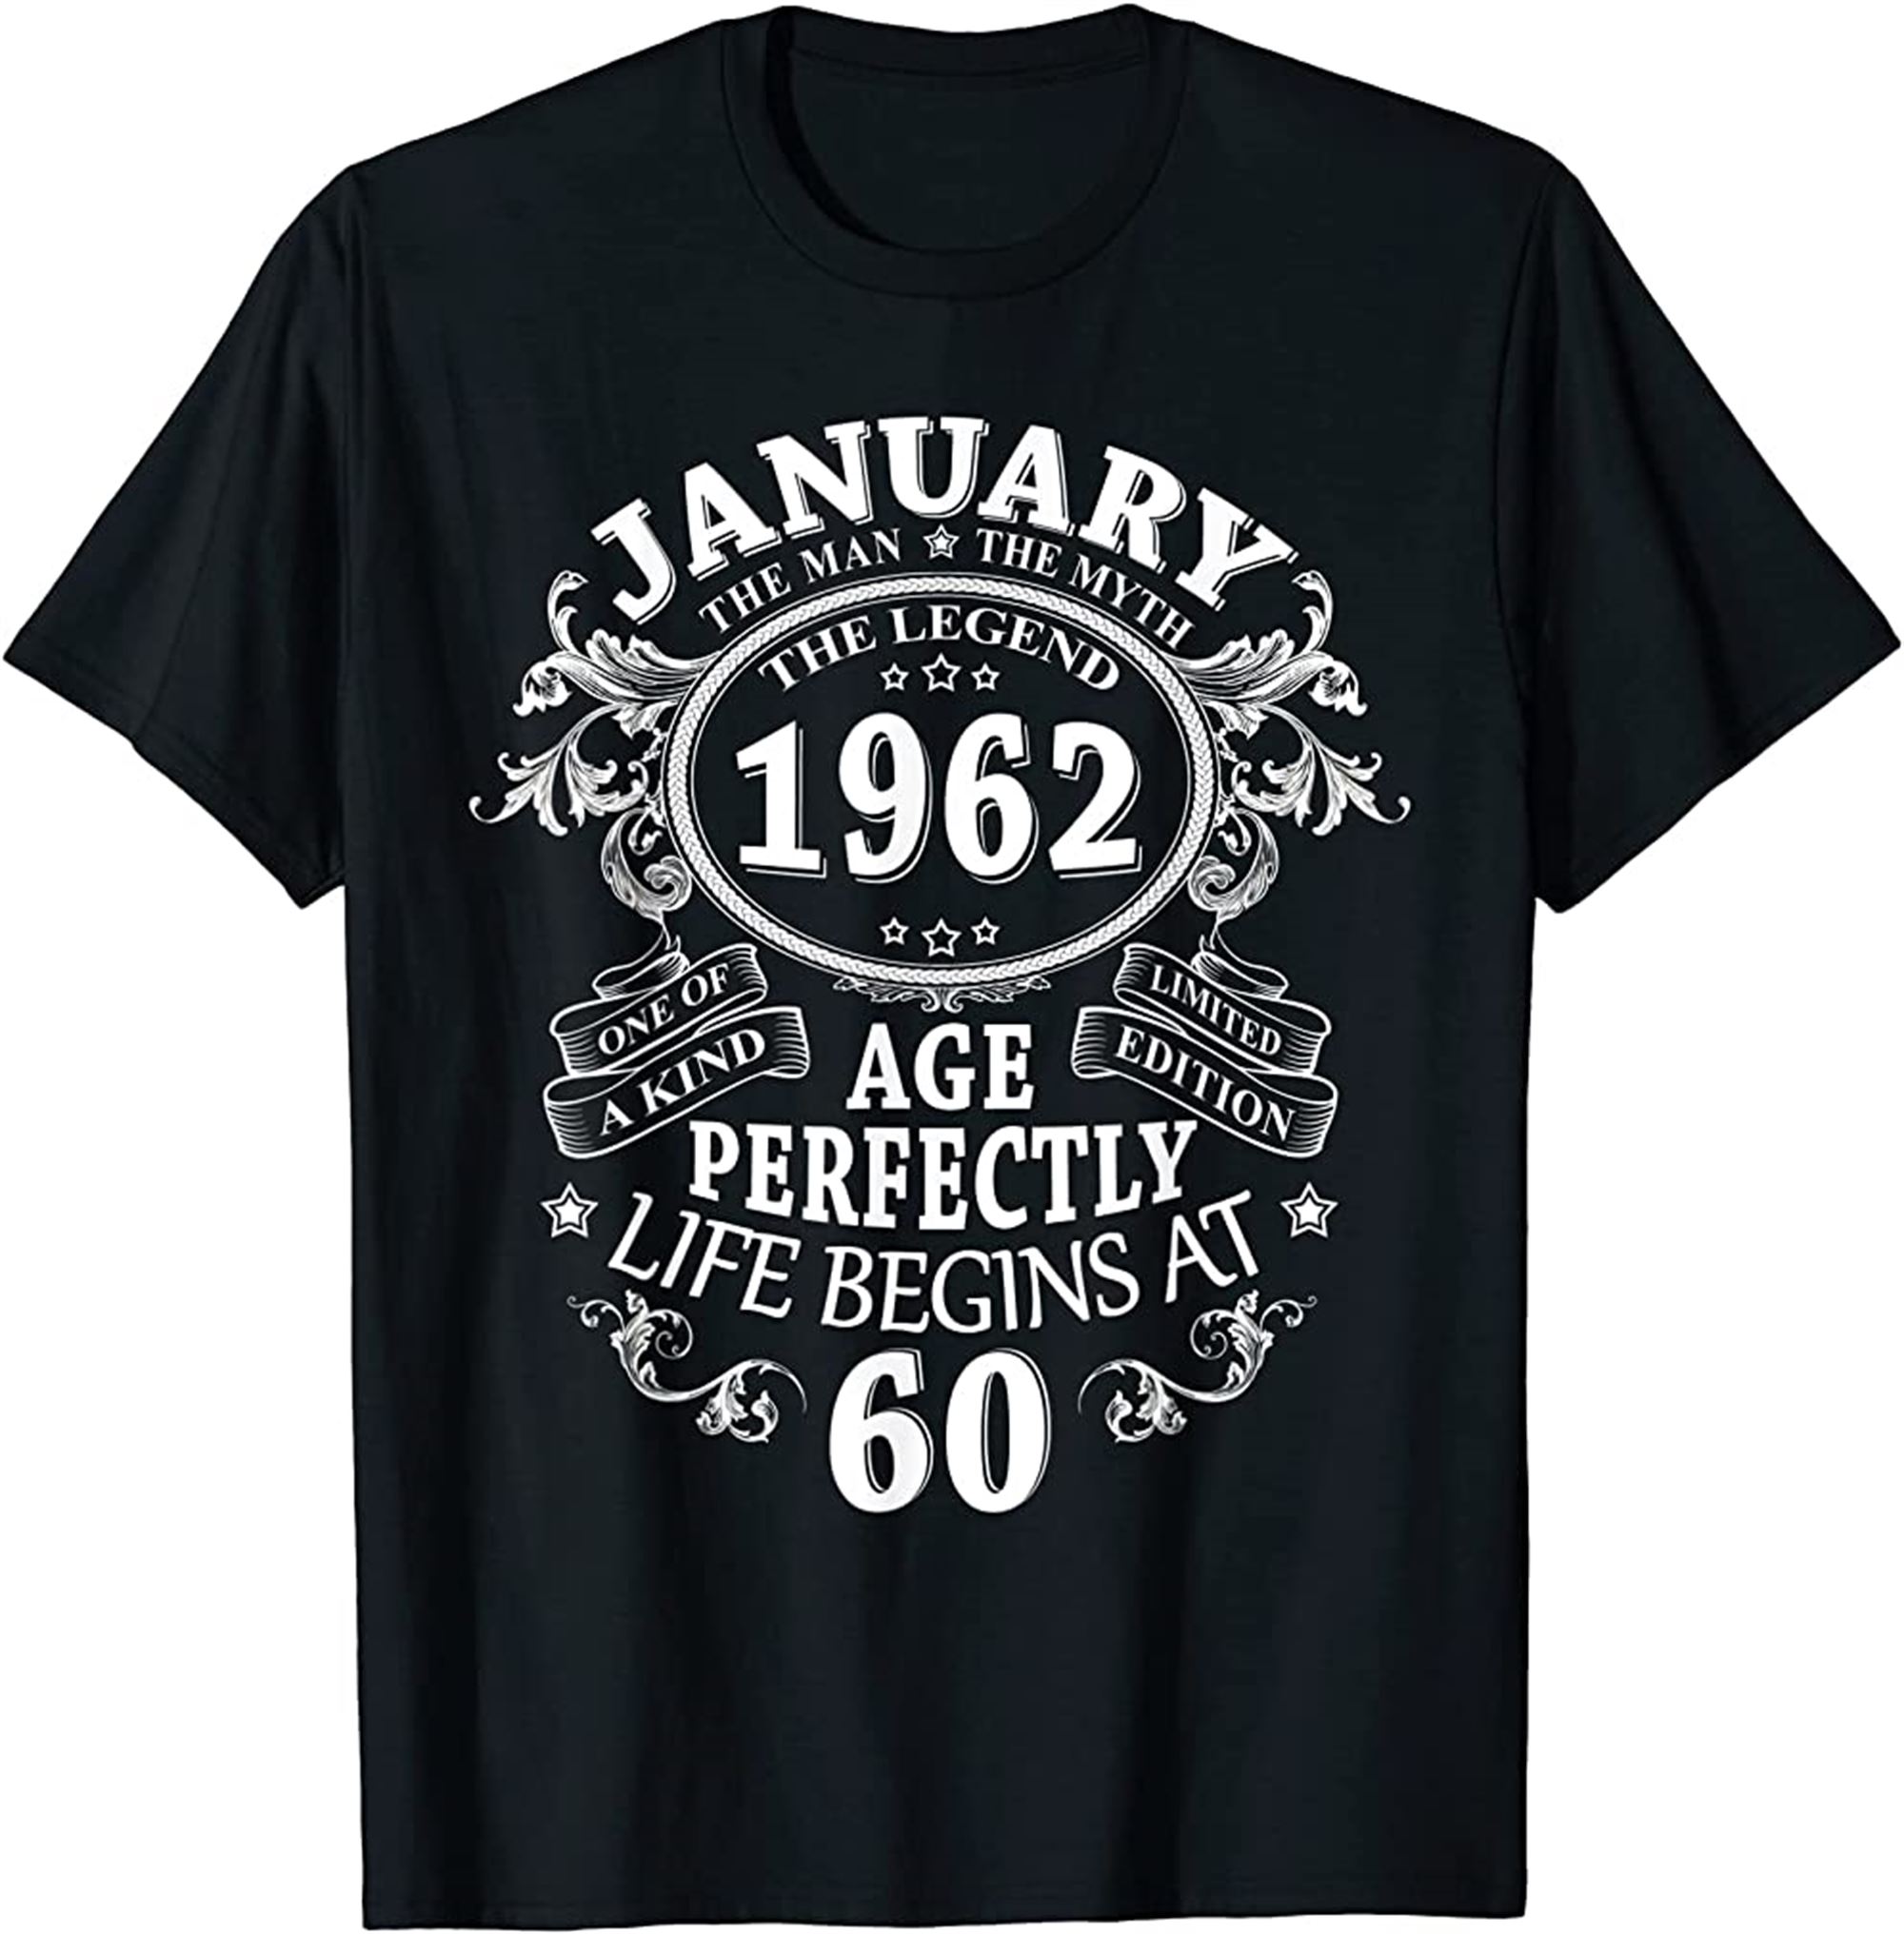 Mens January 1962 The Man Myth Legend 60 Year Old Birthday Gifts T-shirt Plus Size Up To 5xl